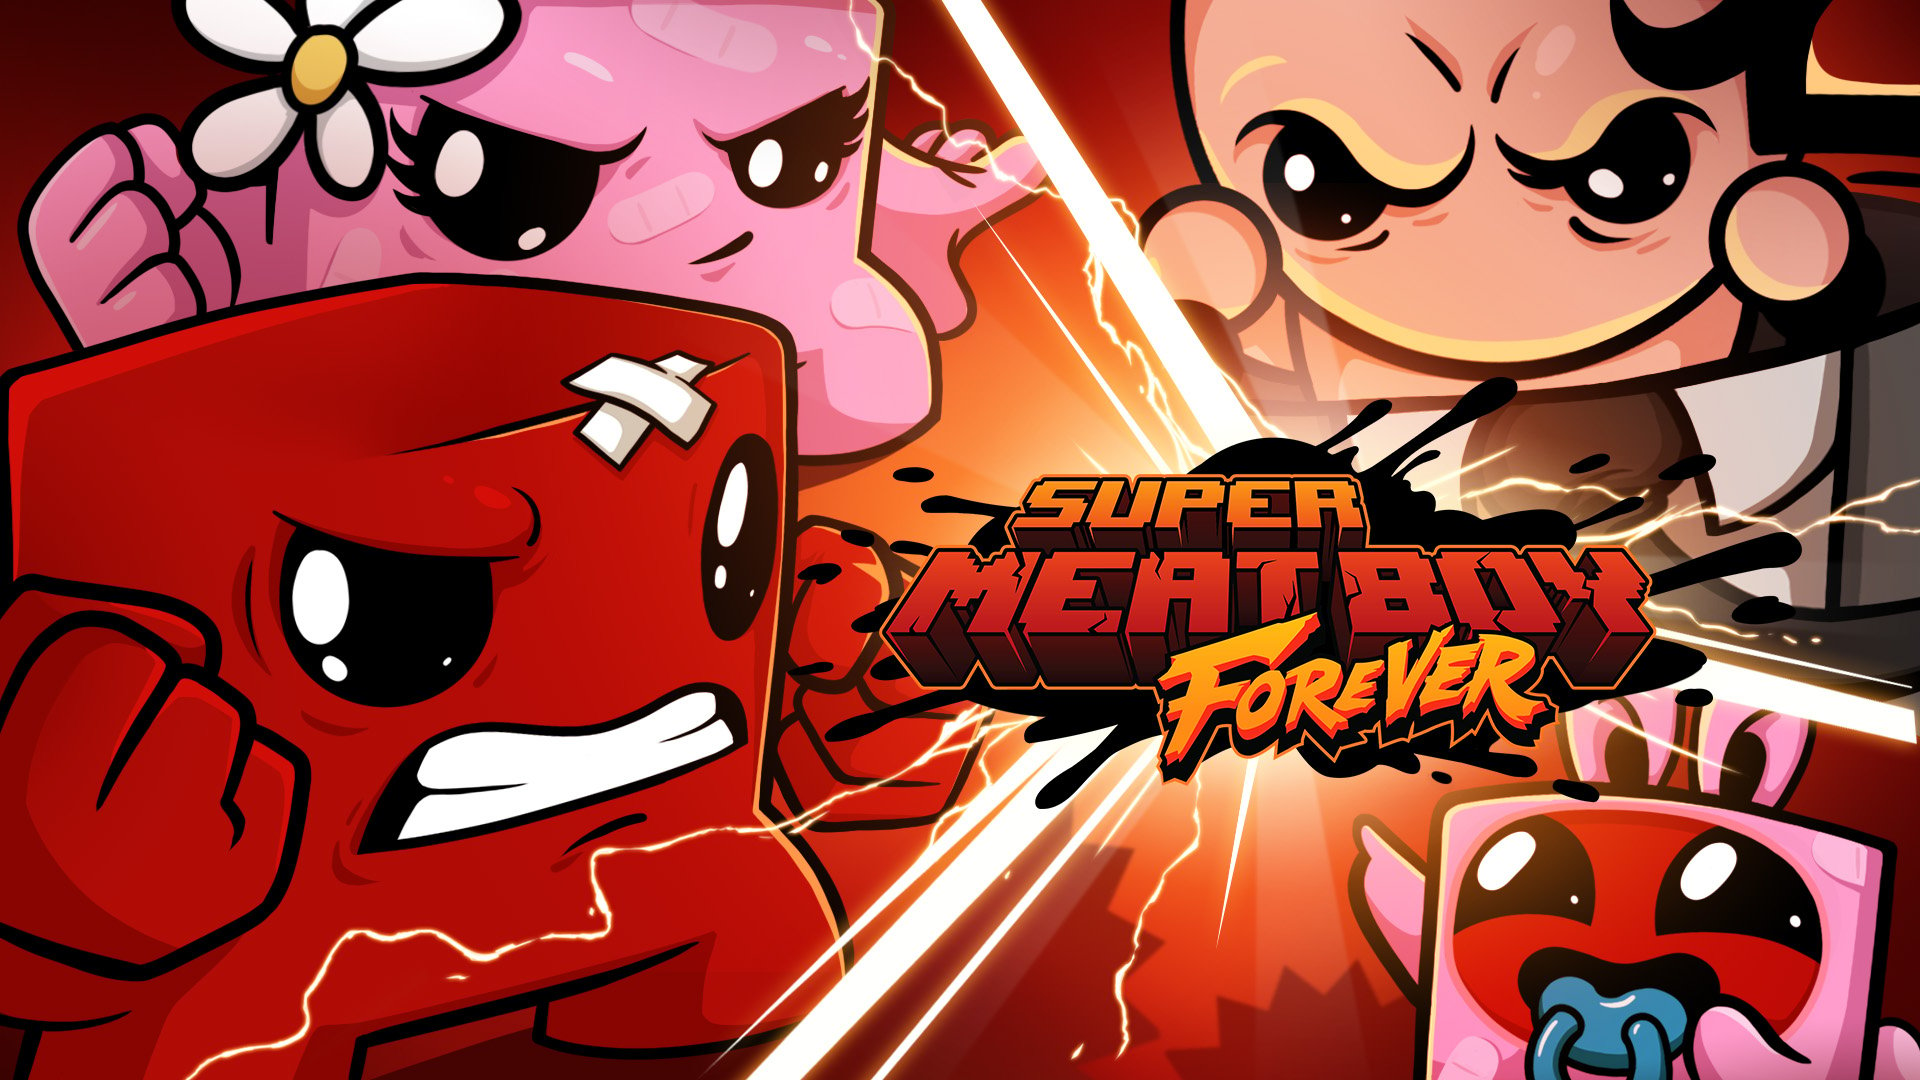 Super Meat Boy Forever Coming To Android Next Year thumbnail